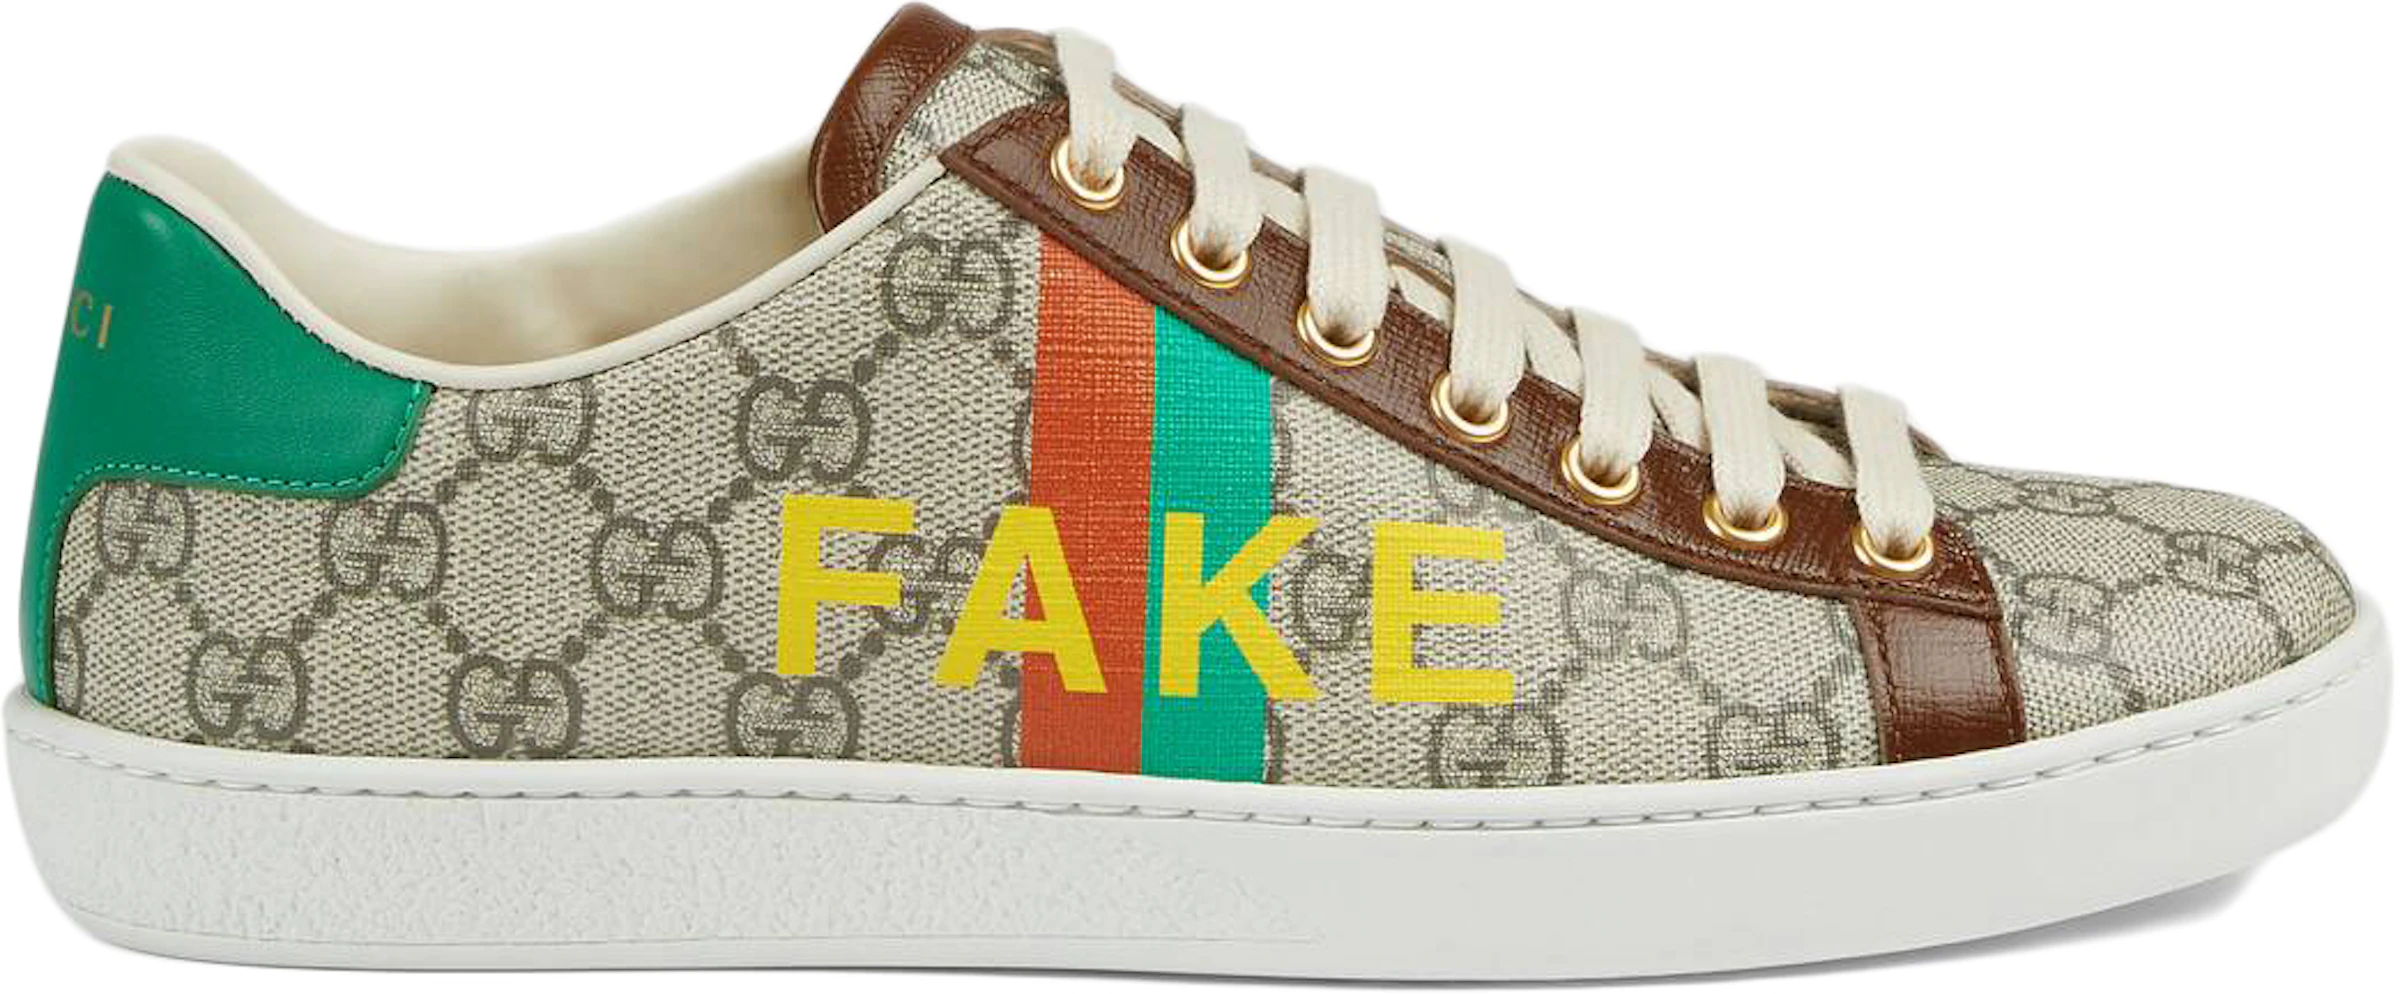 Gucci Ace Fake/Not (W) - _636359 2GC10 8260 - US